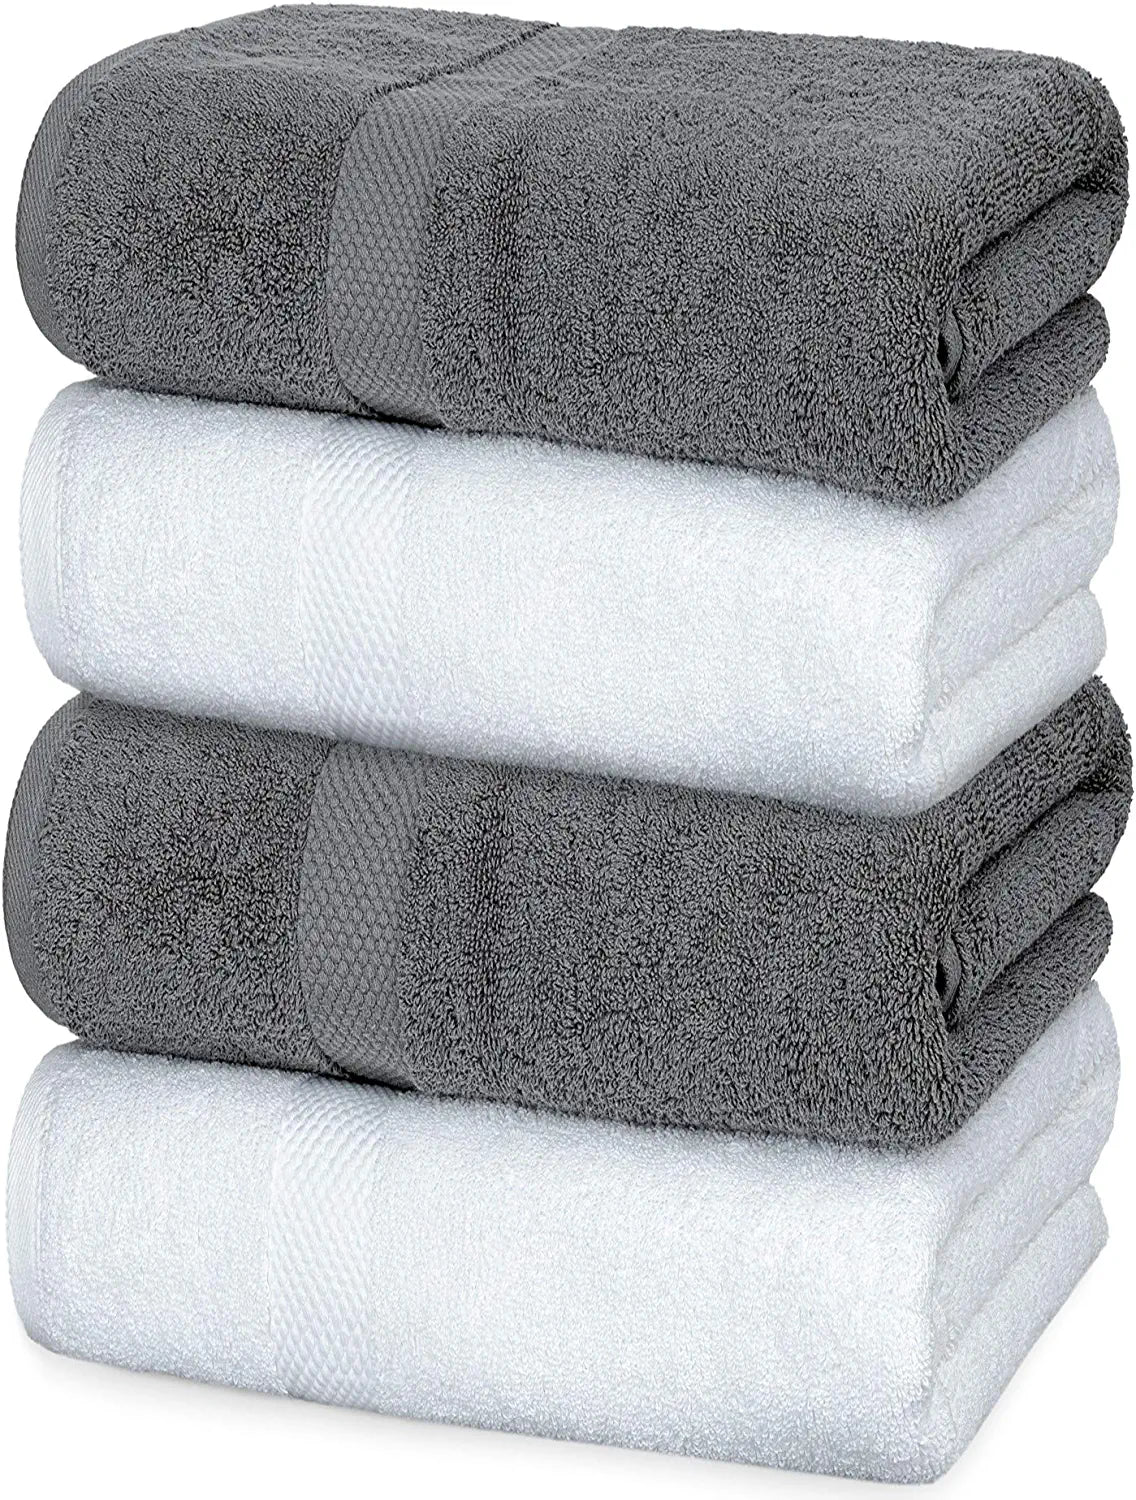 Up To 54% Off on Luxury White Bath Towels Larg